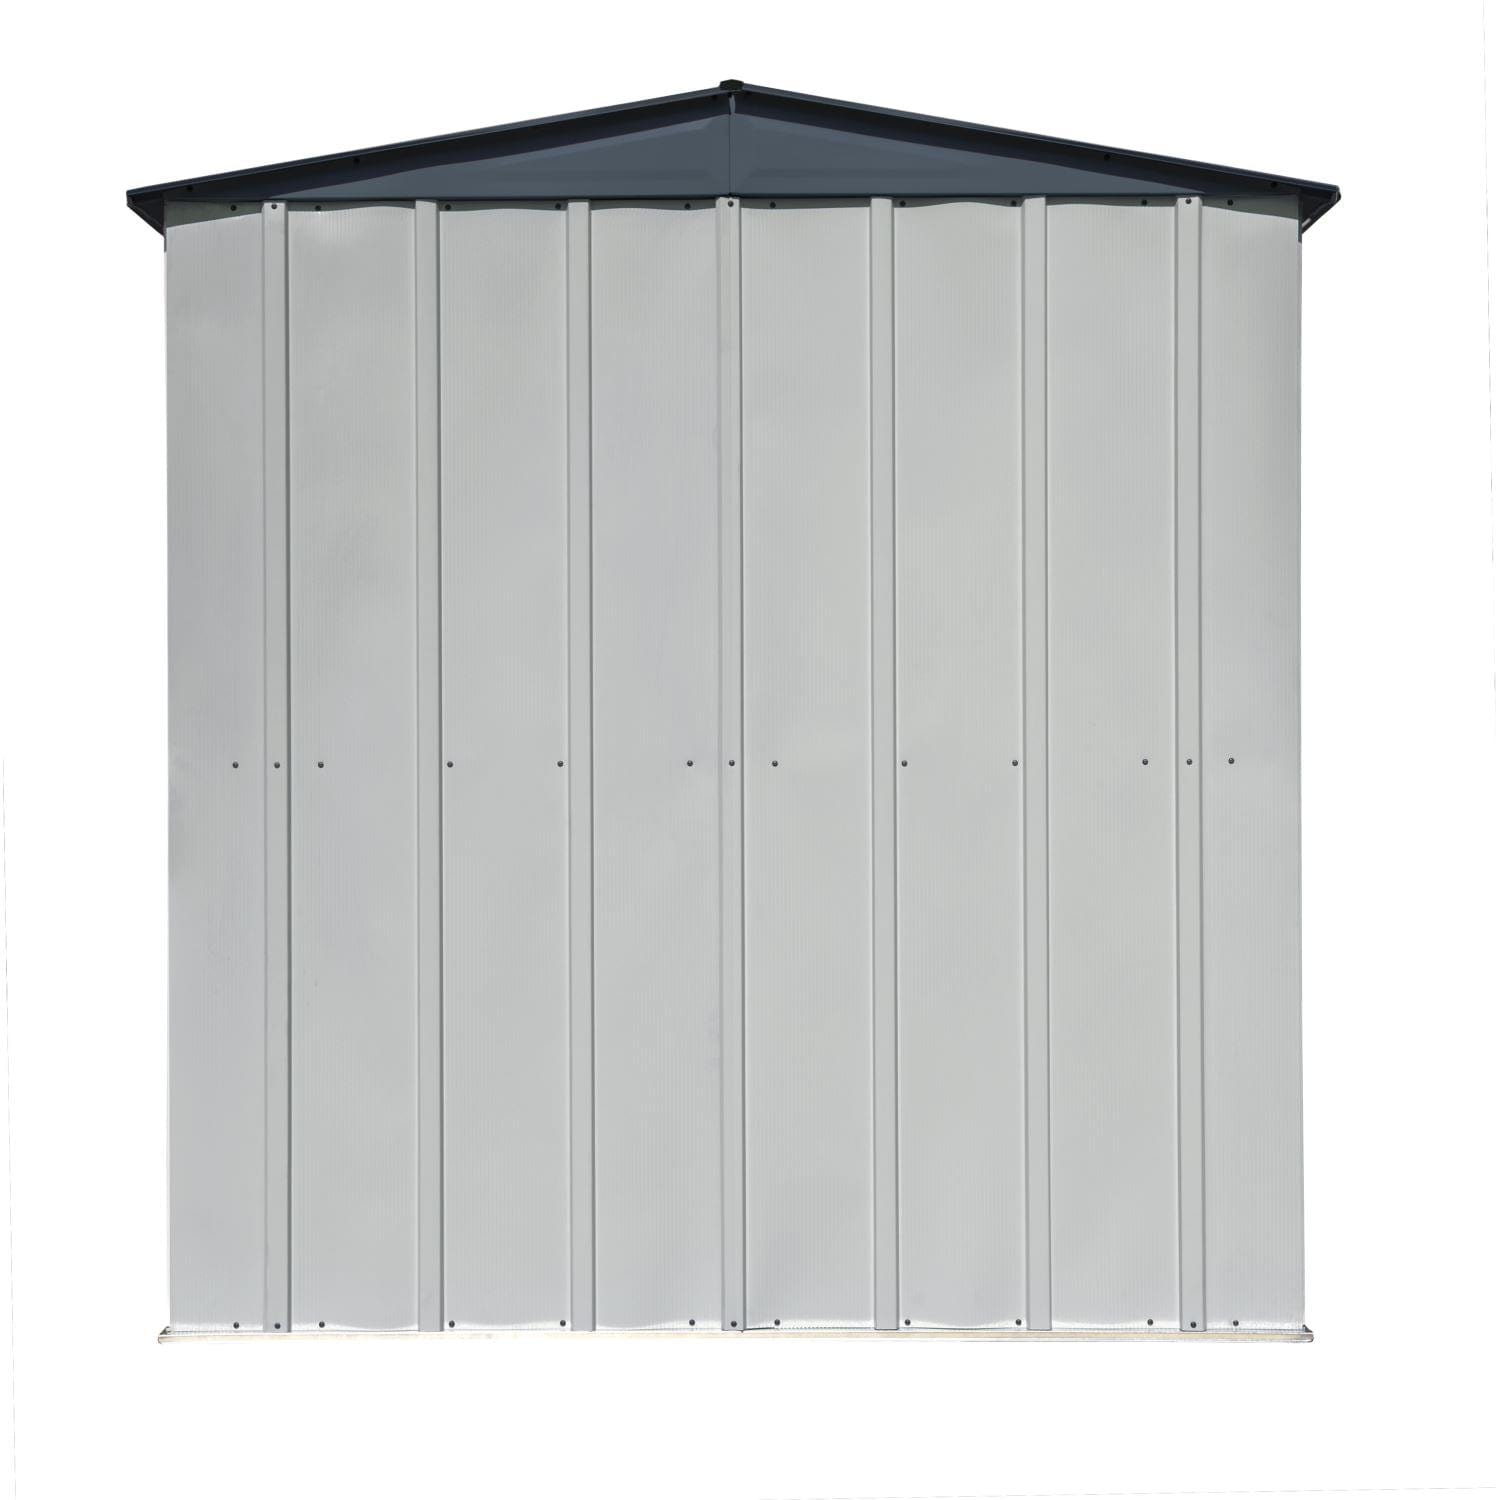 Spacemaker Metal Storage Shed Kit Spacemaker | Patio Shed 6' x 3' x 6' - Flute Grey and Anthracite PS63